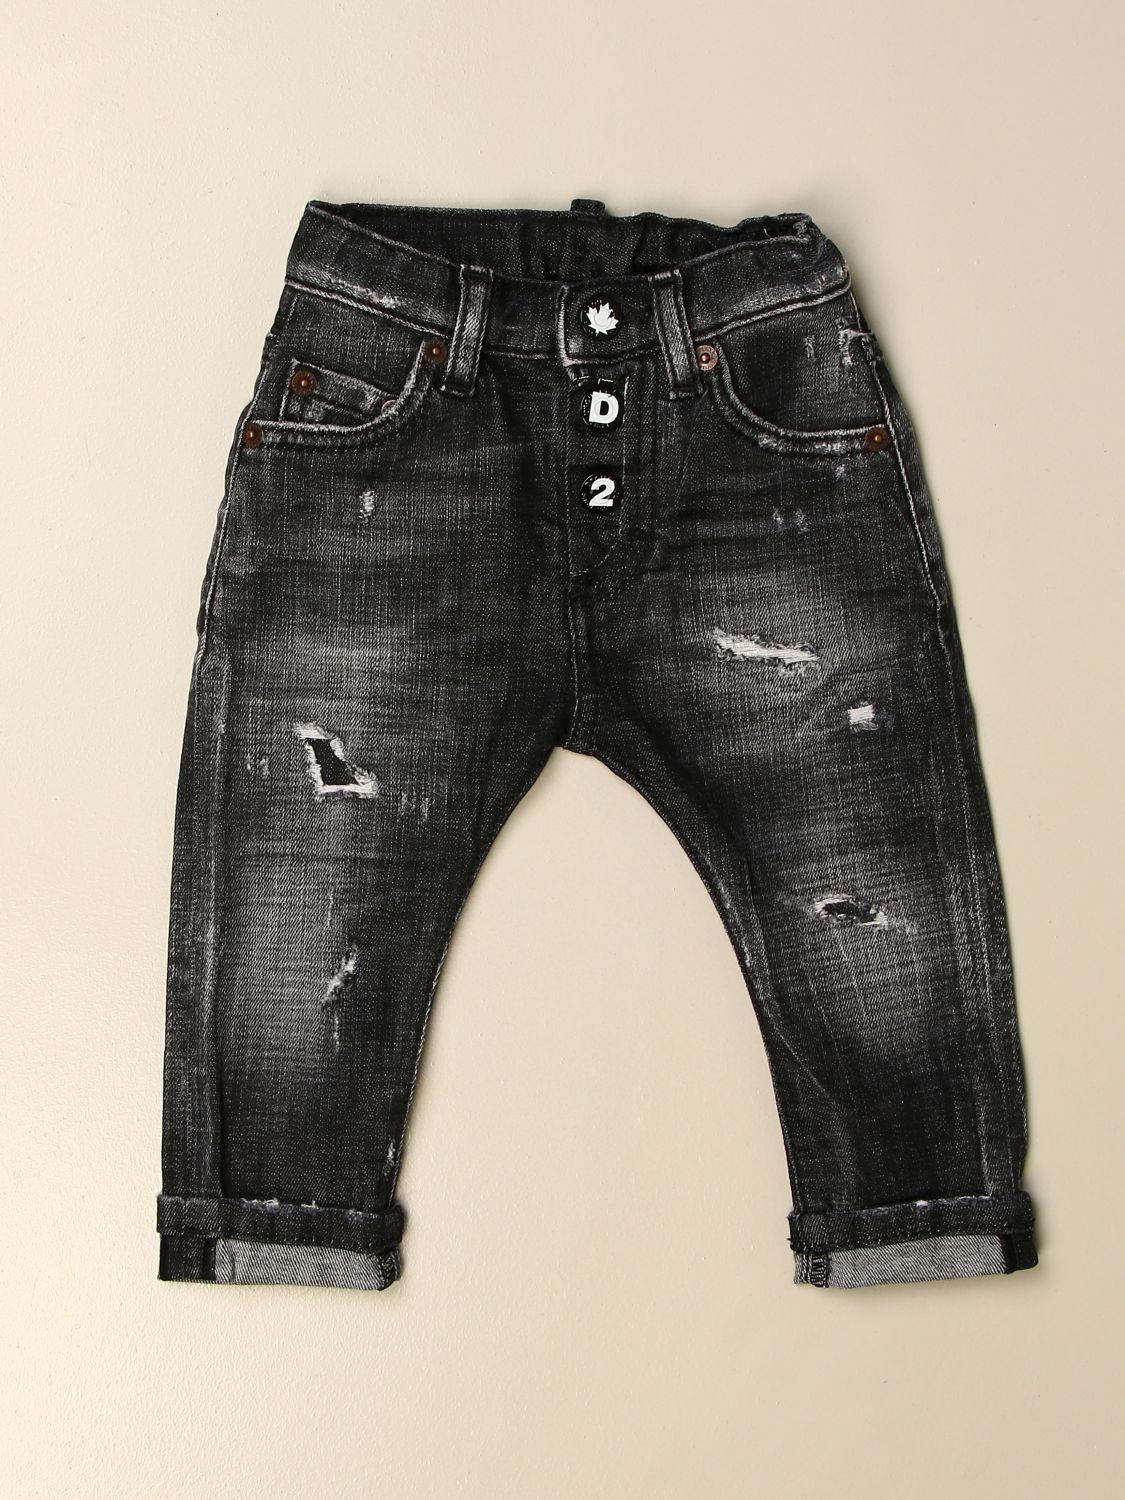 DSQUARED2 JUNIOR: jeans in used denim with tears | Jeans Dsquared2 ...